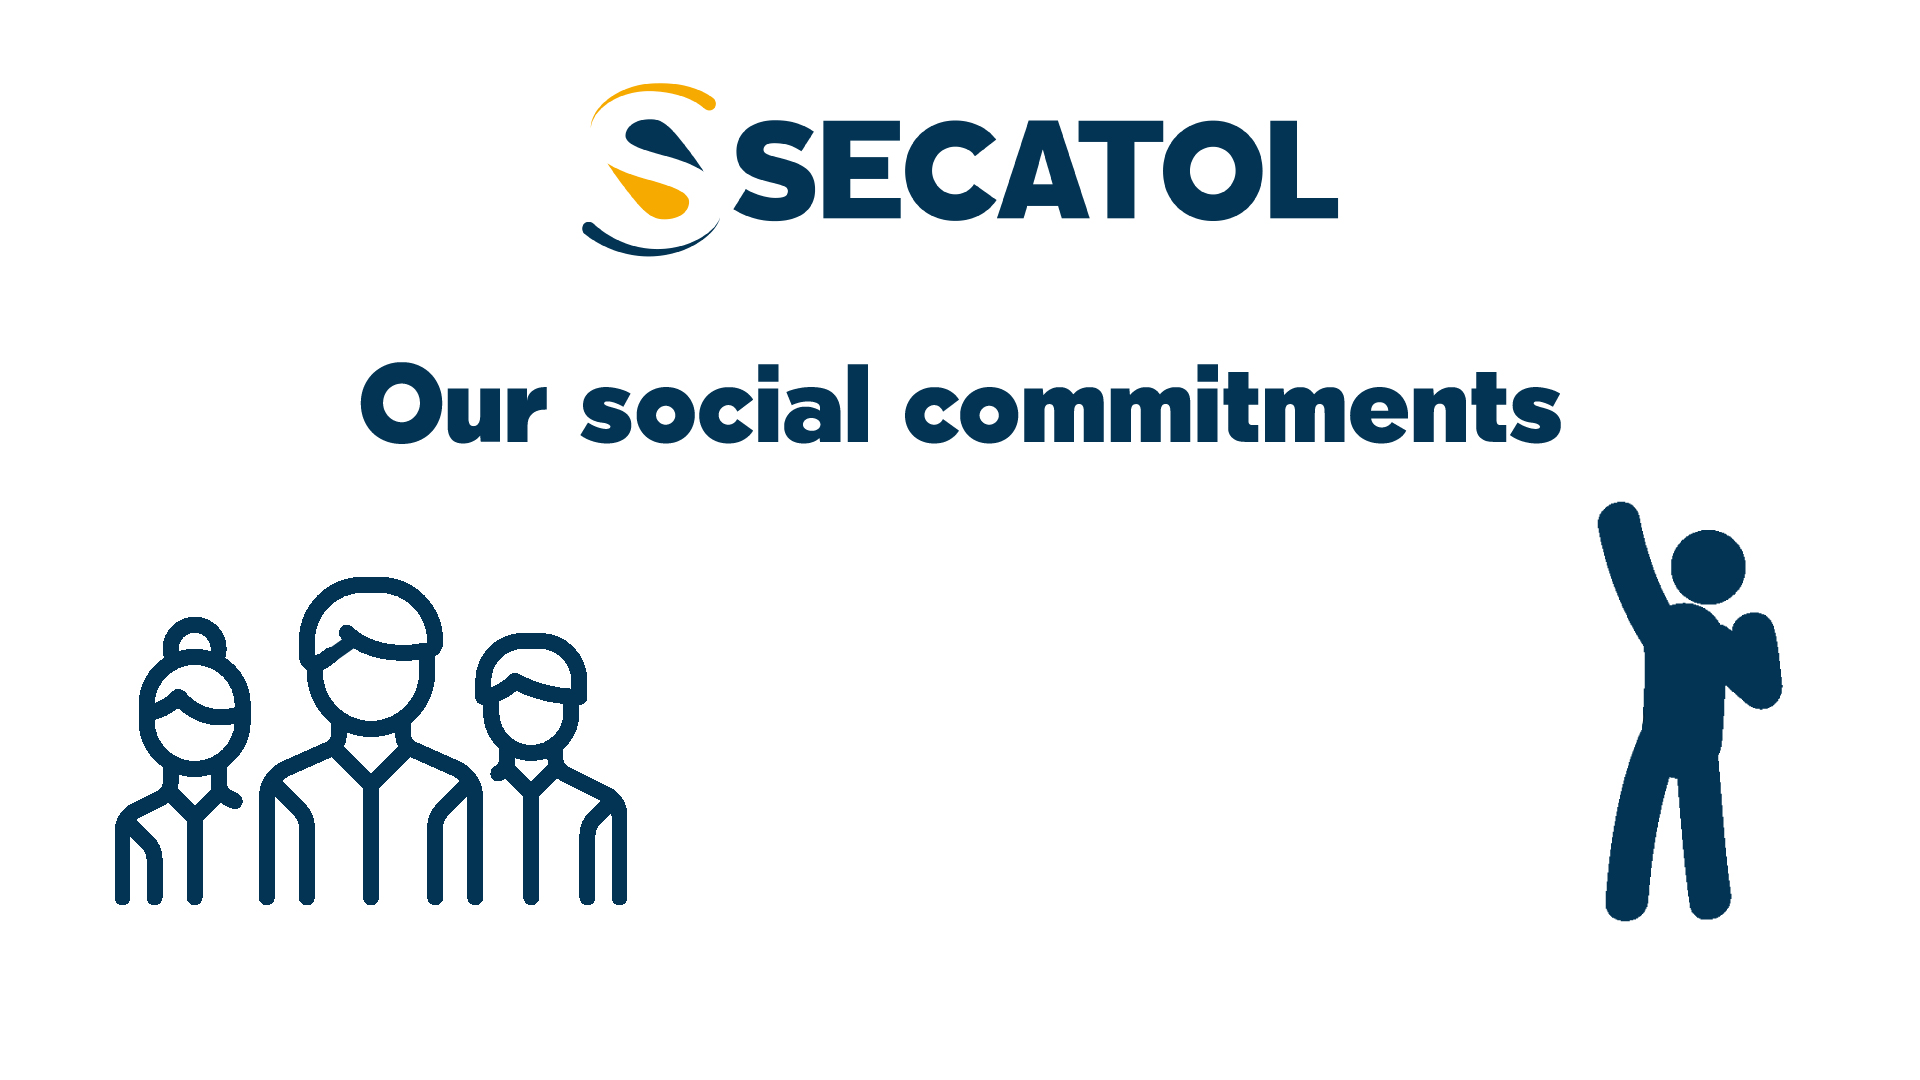 Our social commitments